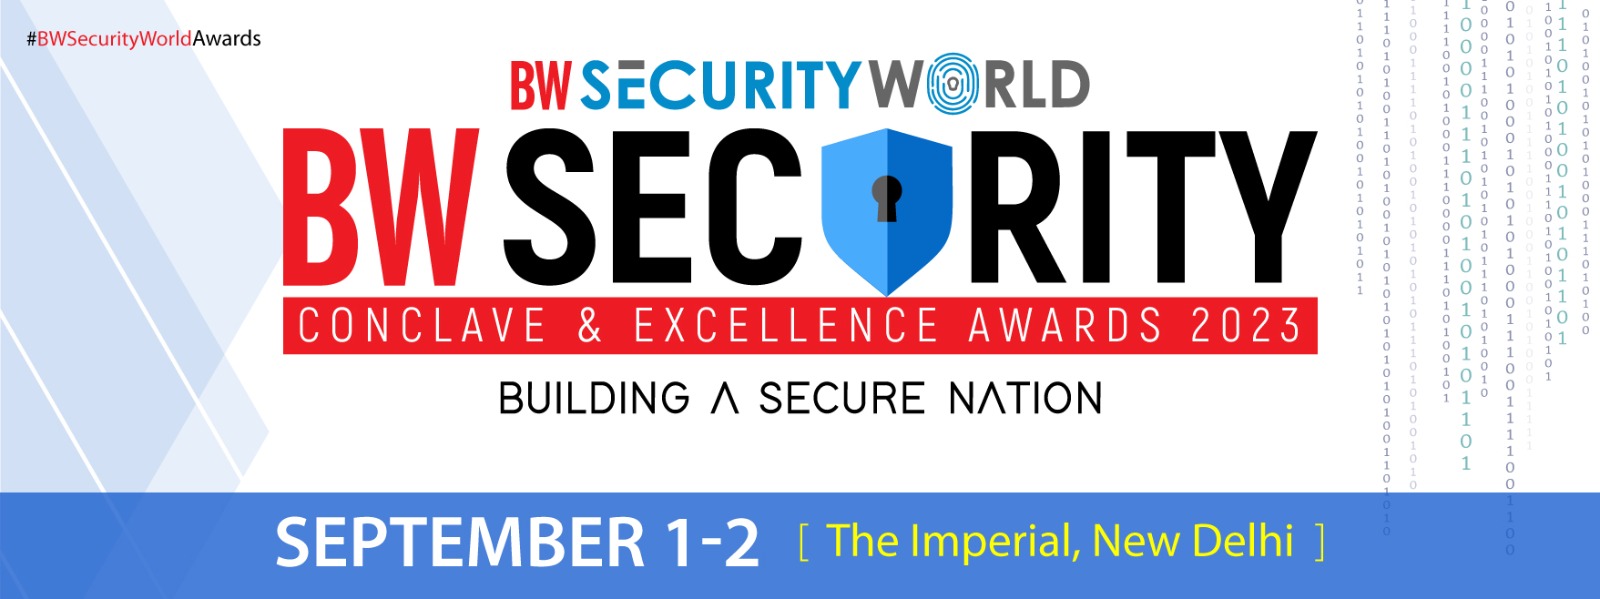 BW SECURITY CONCLAVE & EXCELLENCE AWARDS 2023